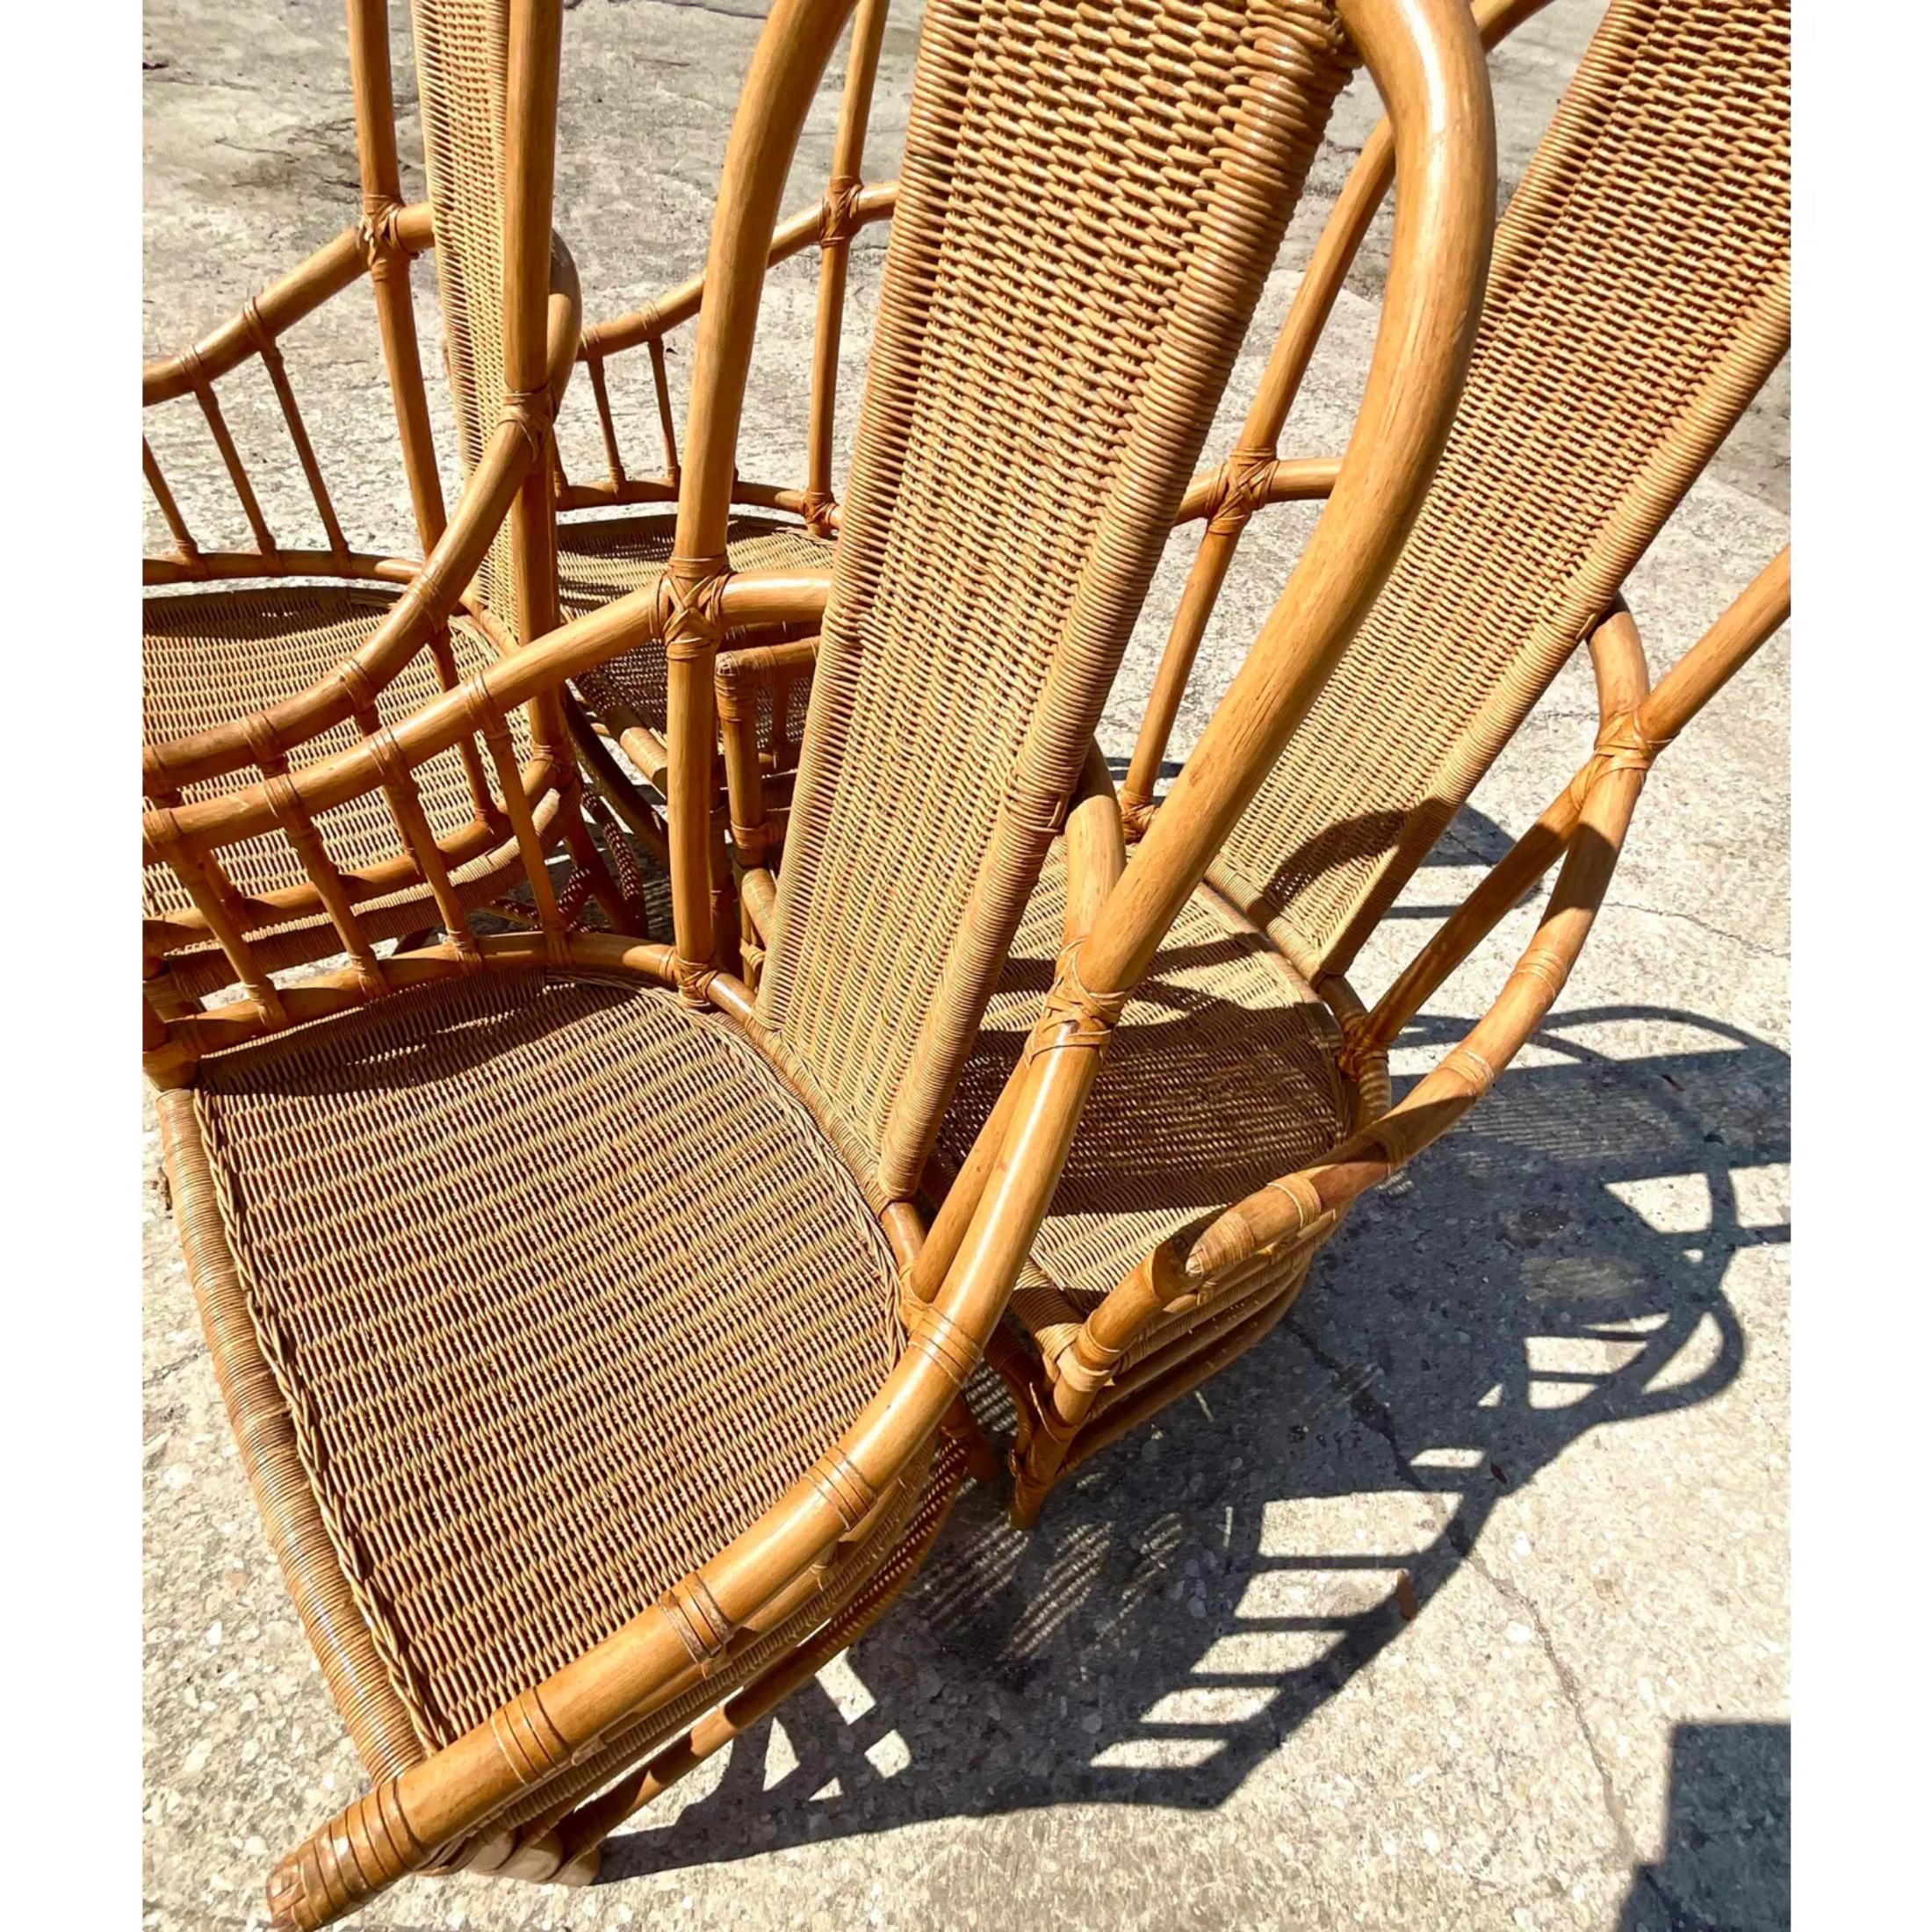 Bohemian Vintage Coastal Mark David Woven Rattan Dining Chairs - Set of 4 For Sale